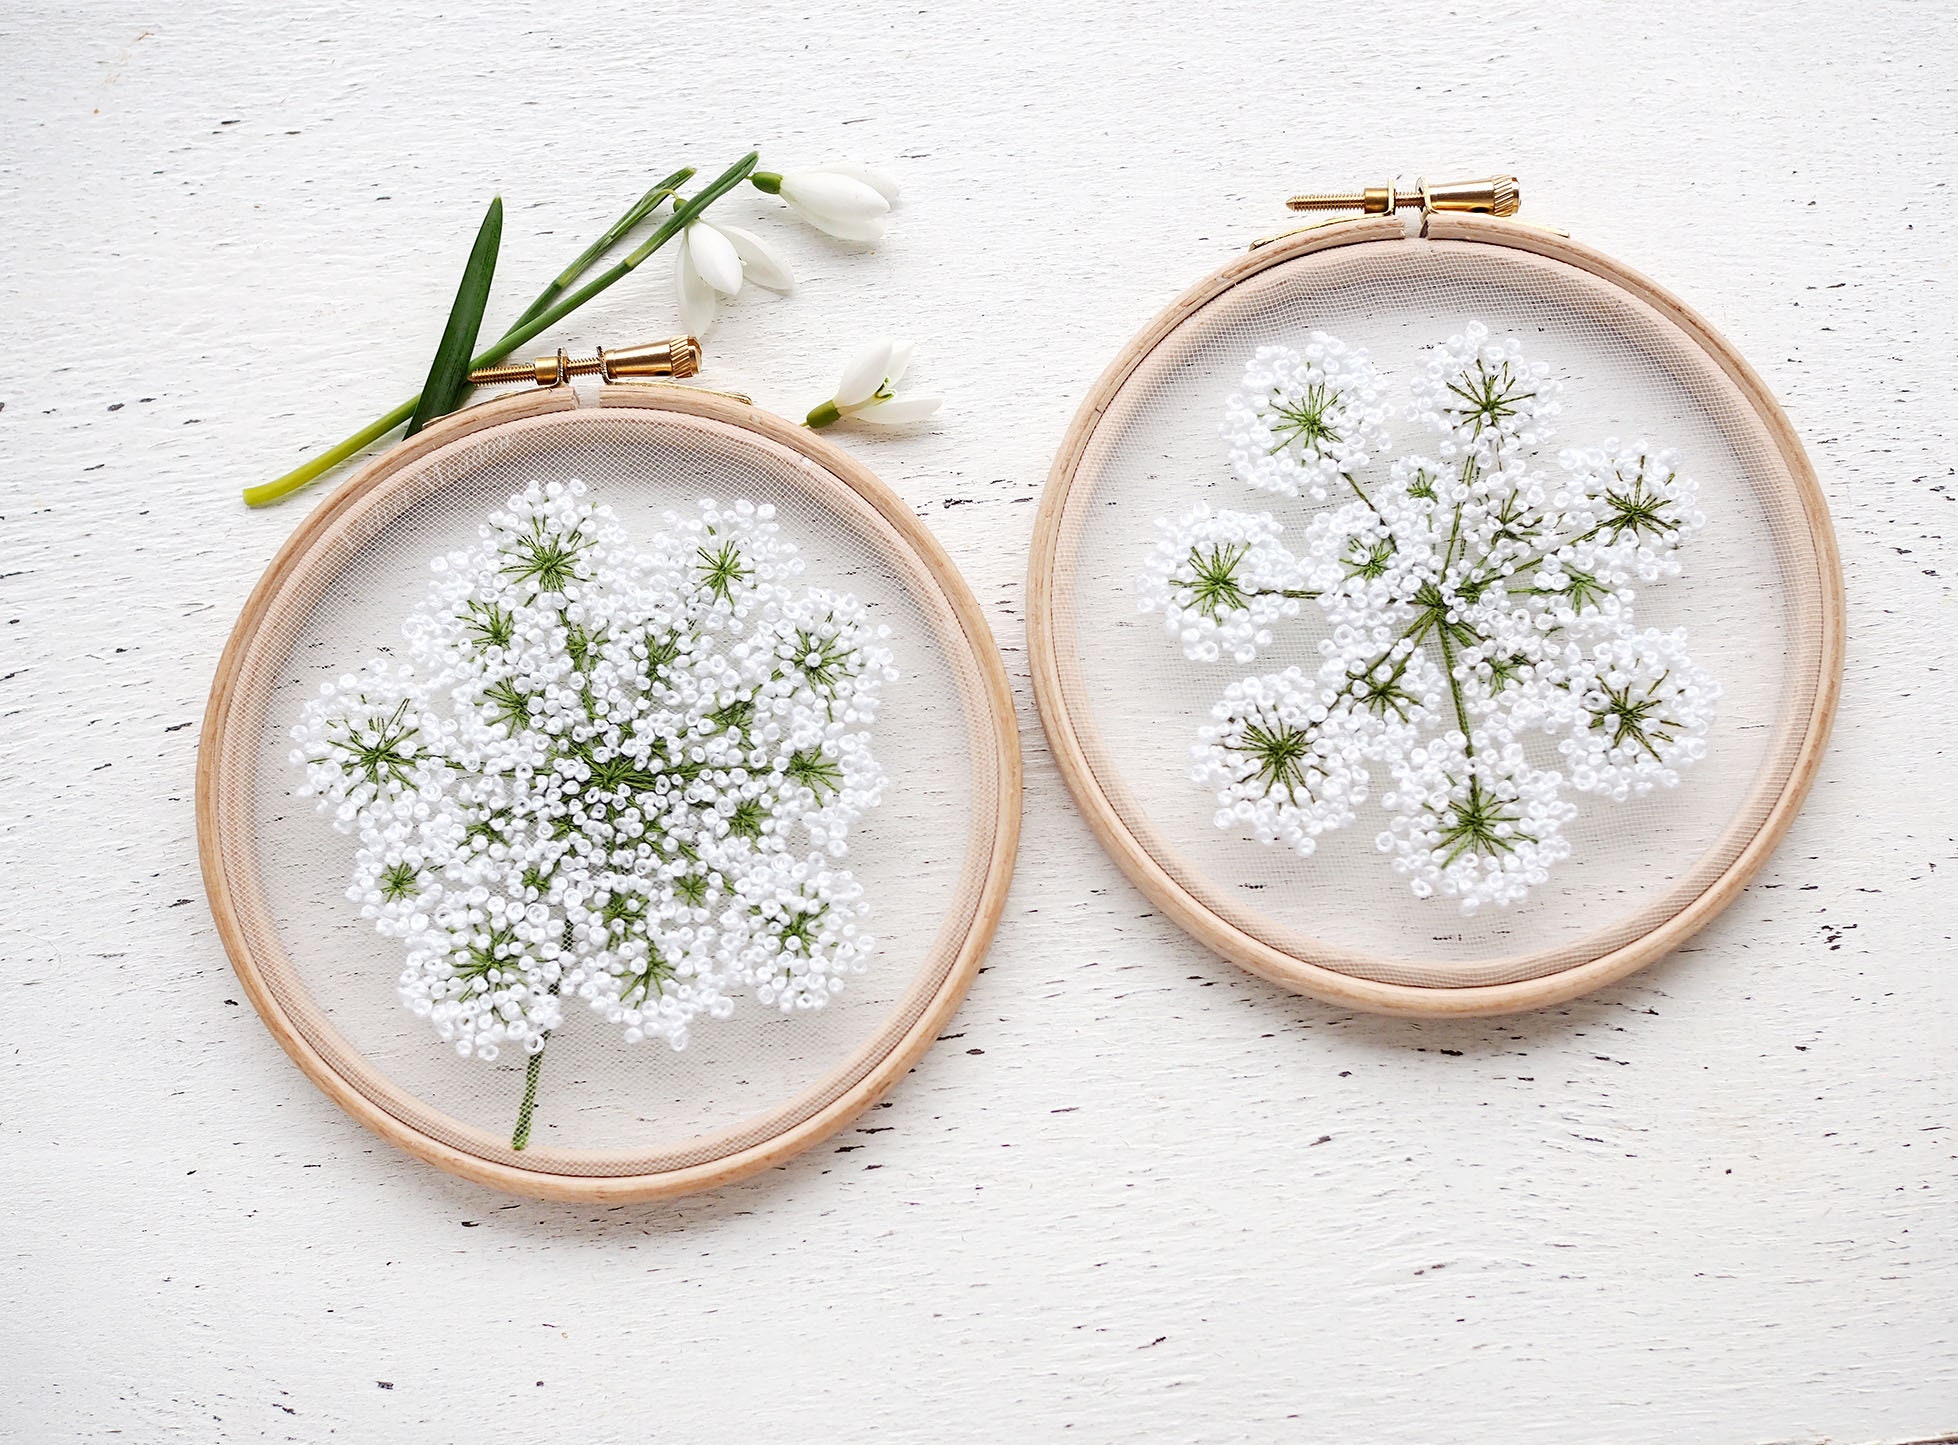 Hand Embroidery Queen Anne Lace 